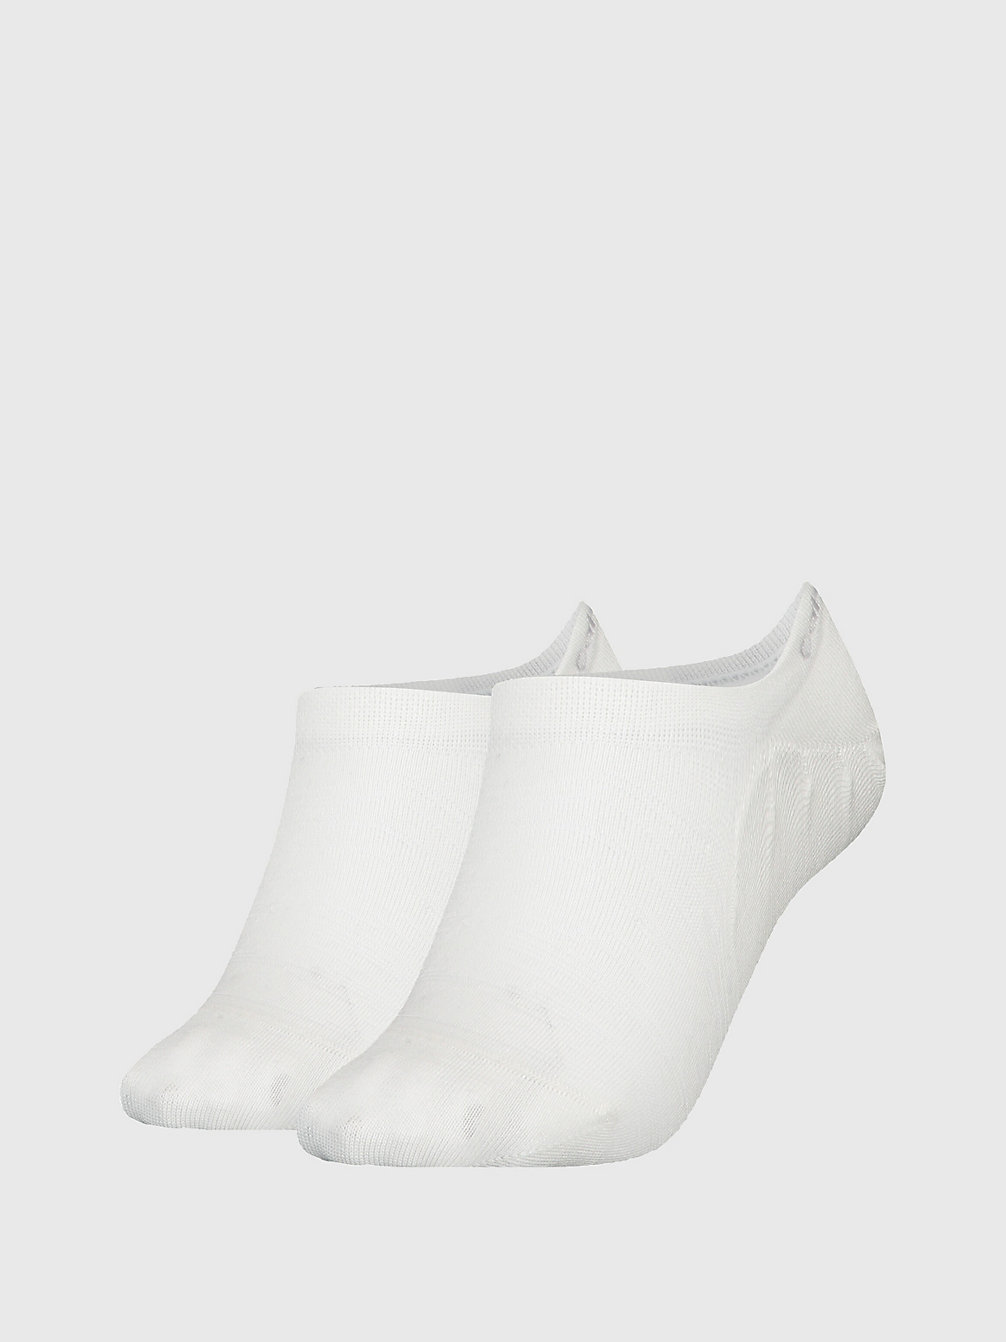 Pack De 2 Pares De Calcetines Invisibles > WHITE > undefined mujer > Calvin Klein